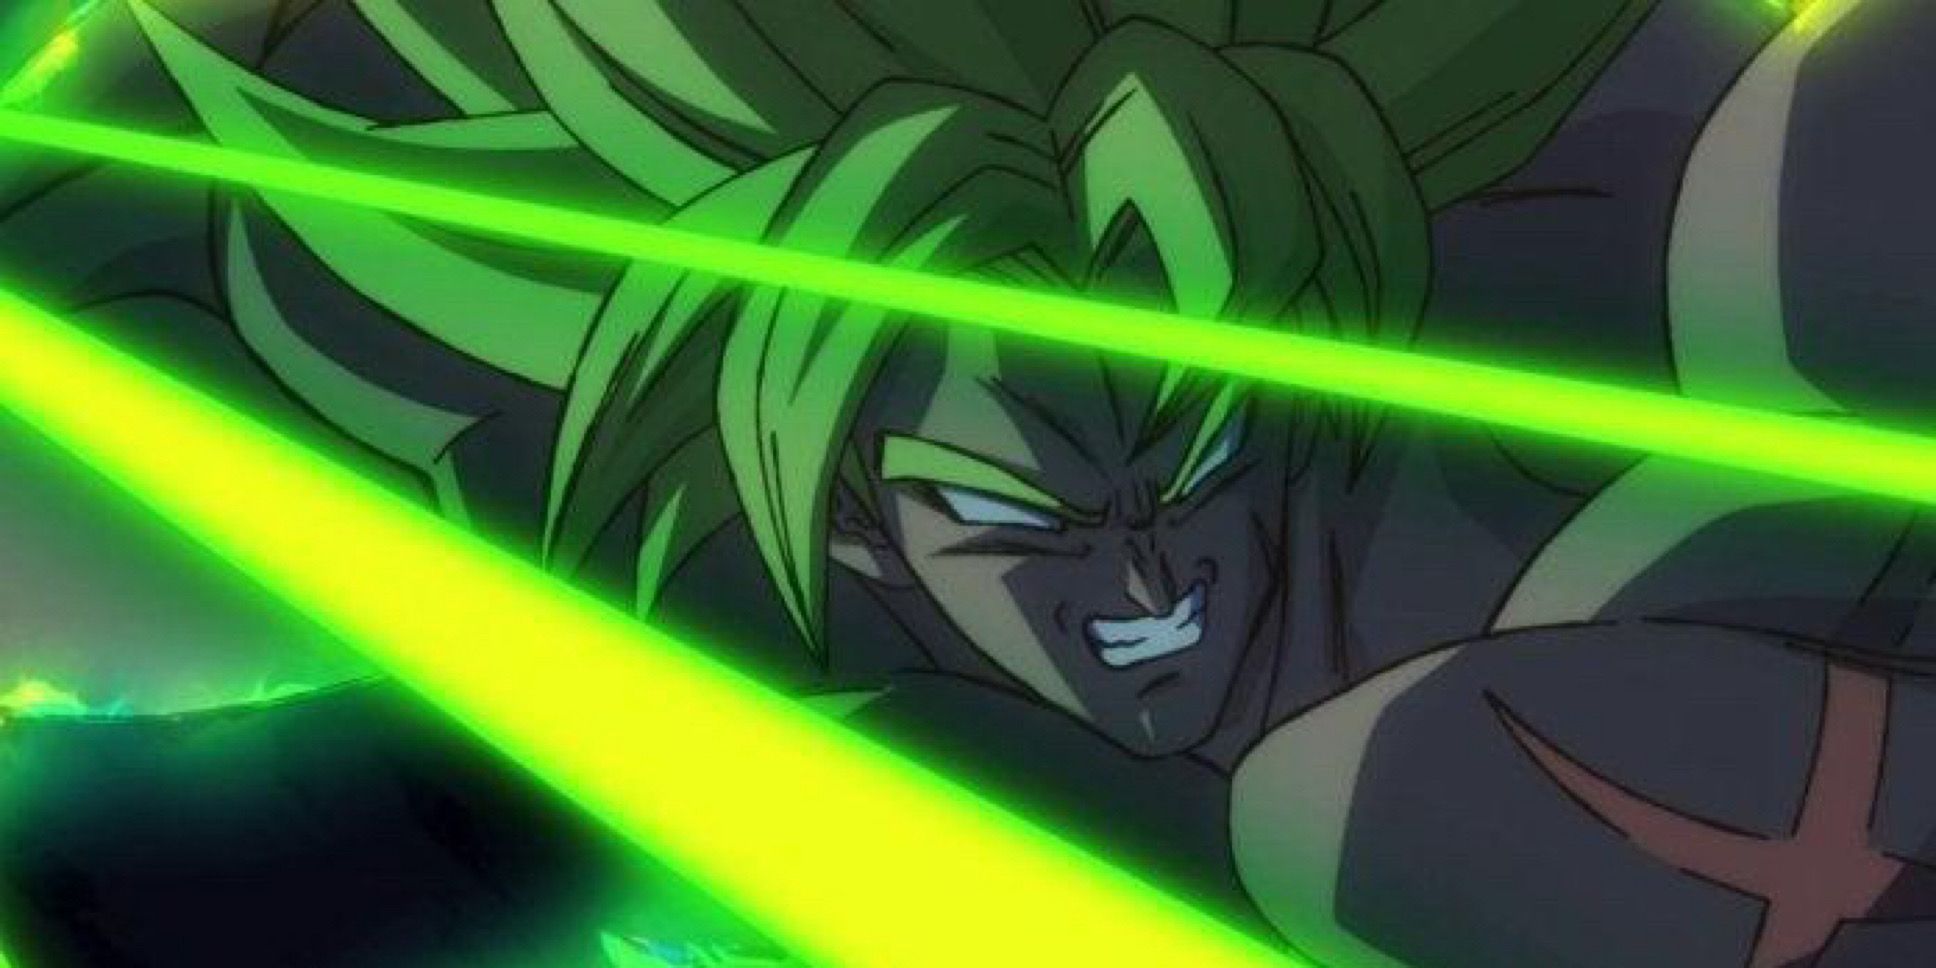 The Best Goku vs. Broly Fight Already Exists, and It's Not Even From Dragon Ball